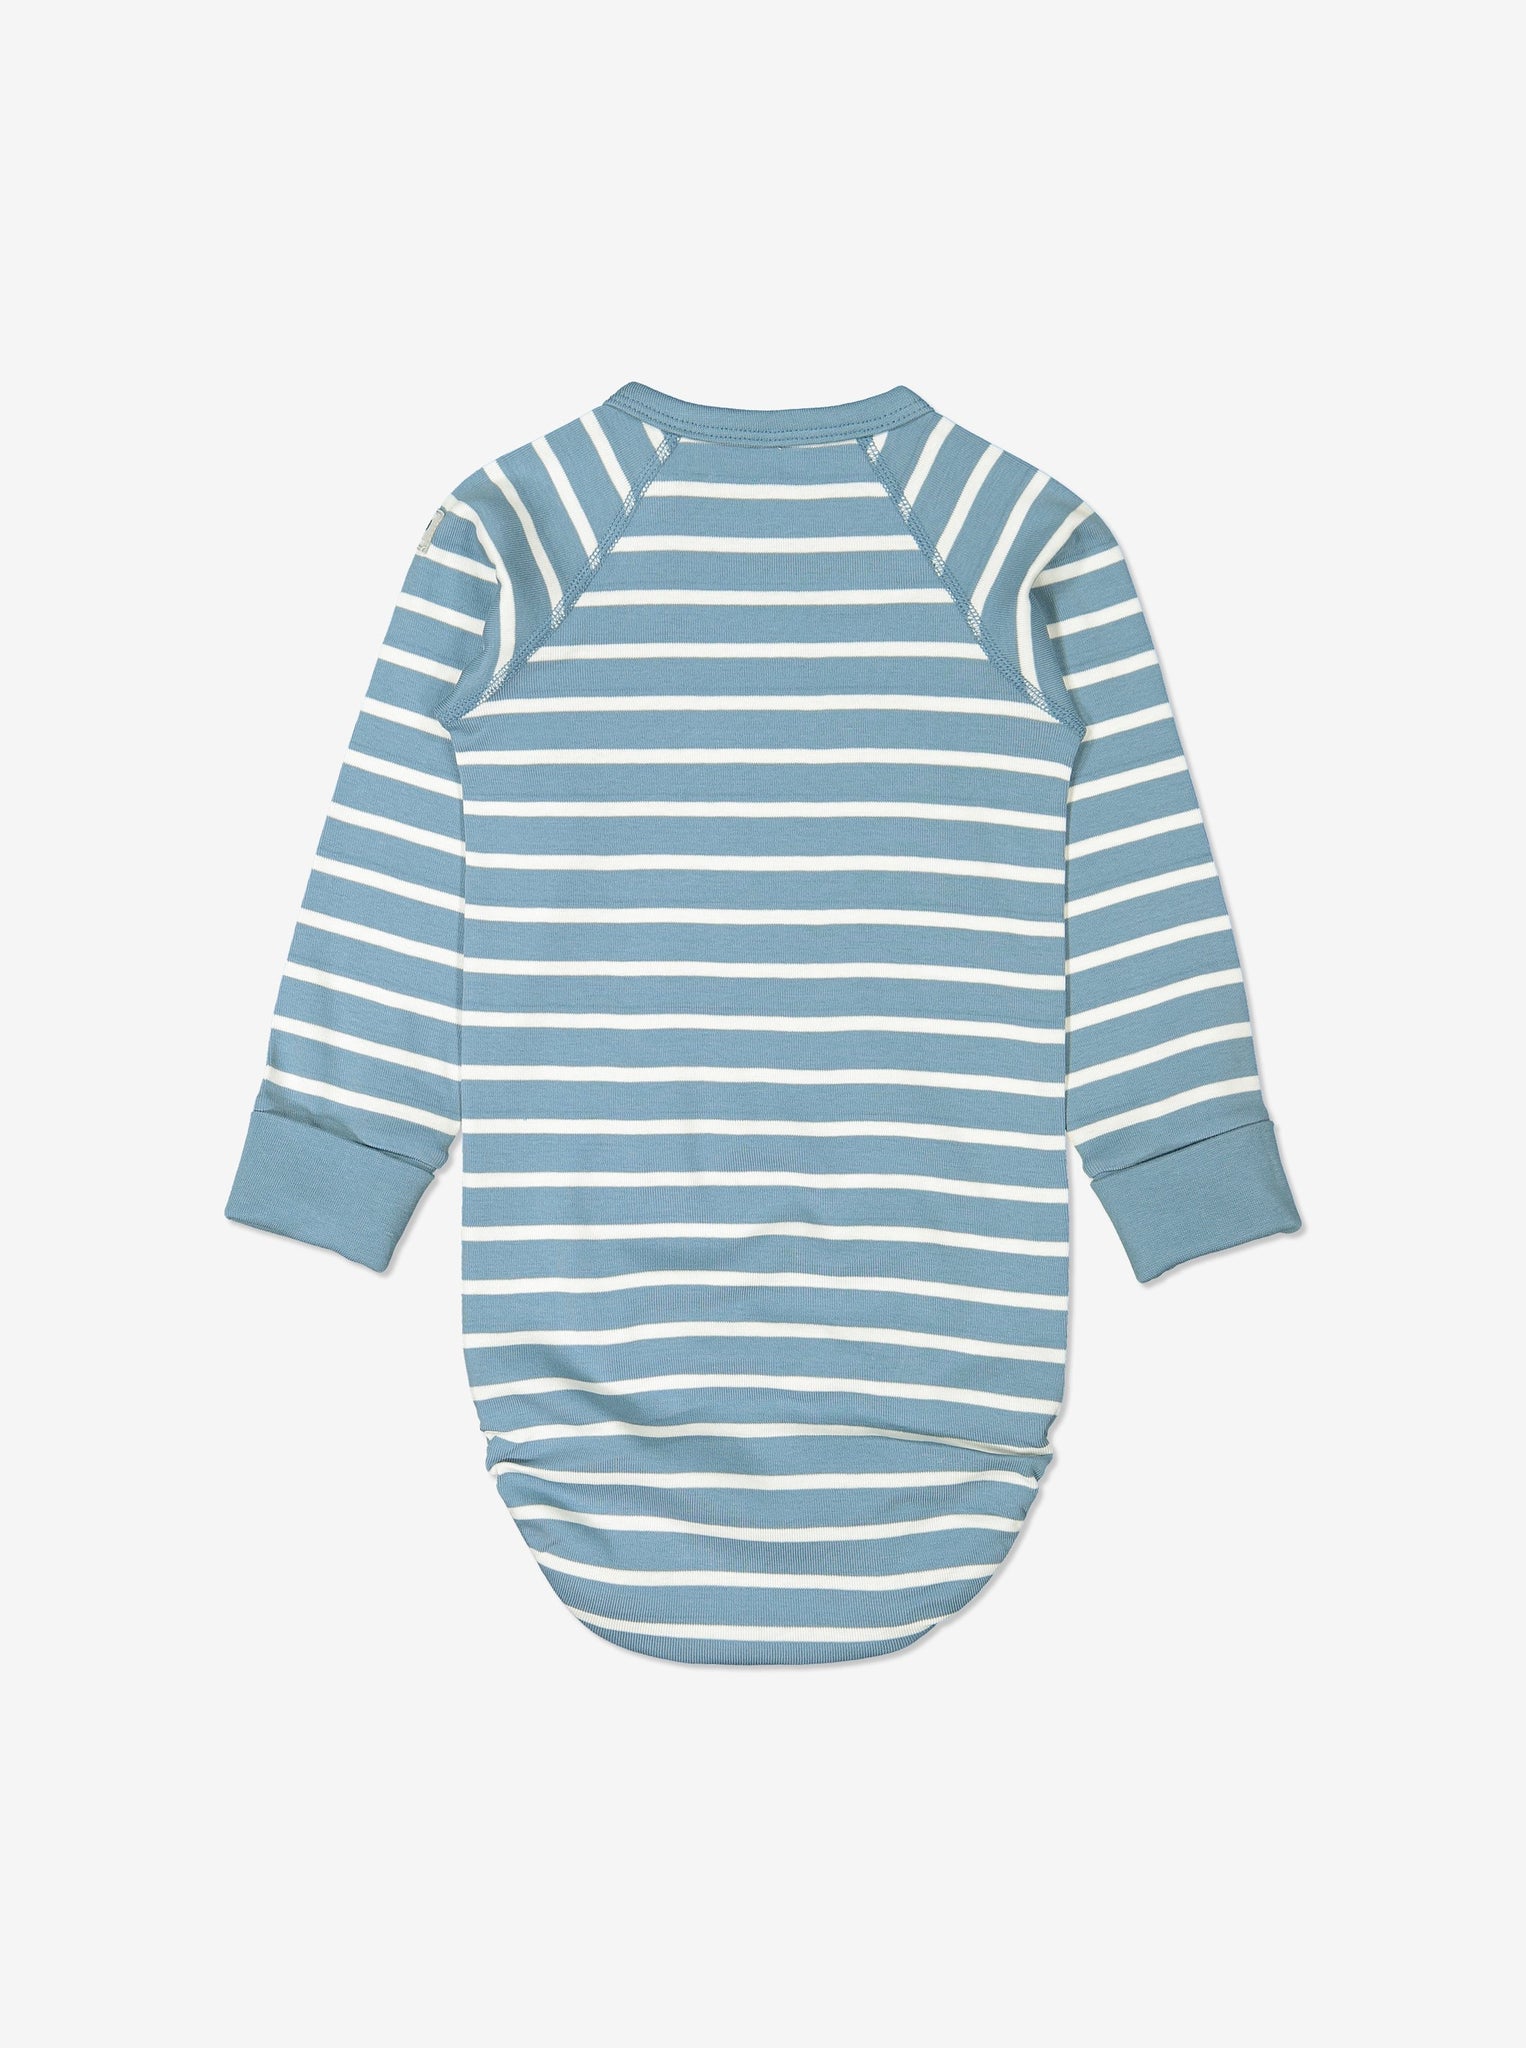 Back view of blue and white striped babygrow for babies, made from GOTS organic cotton fabric